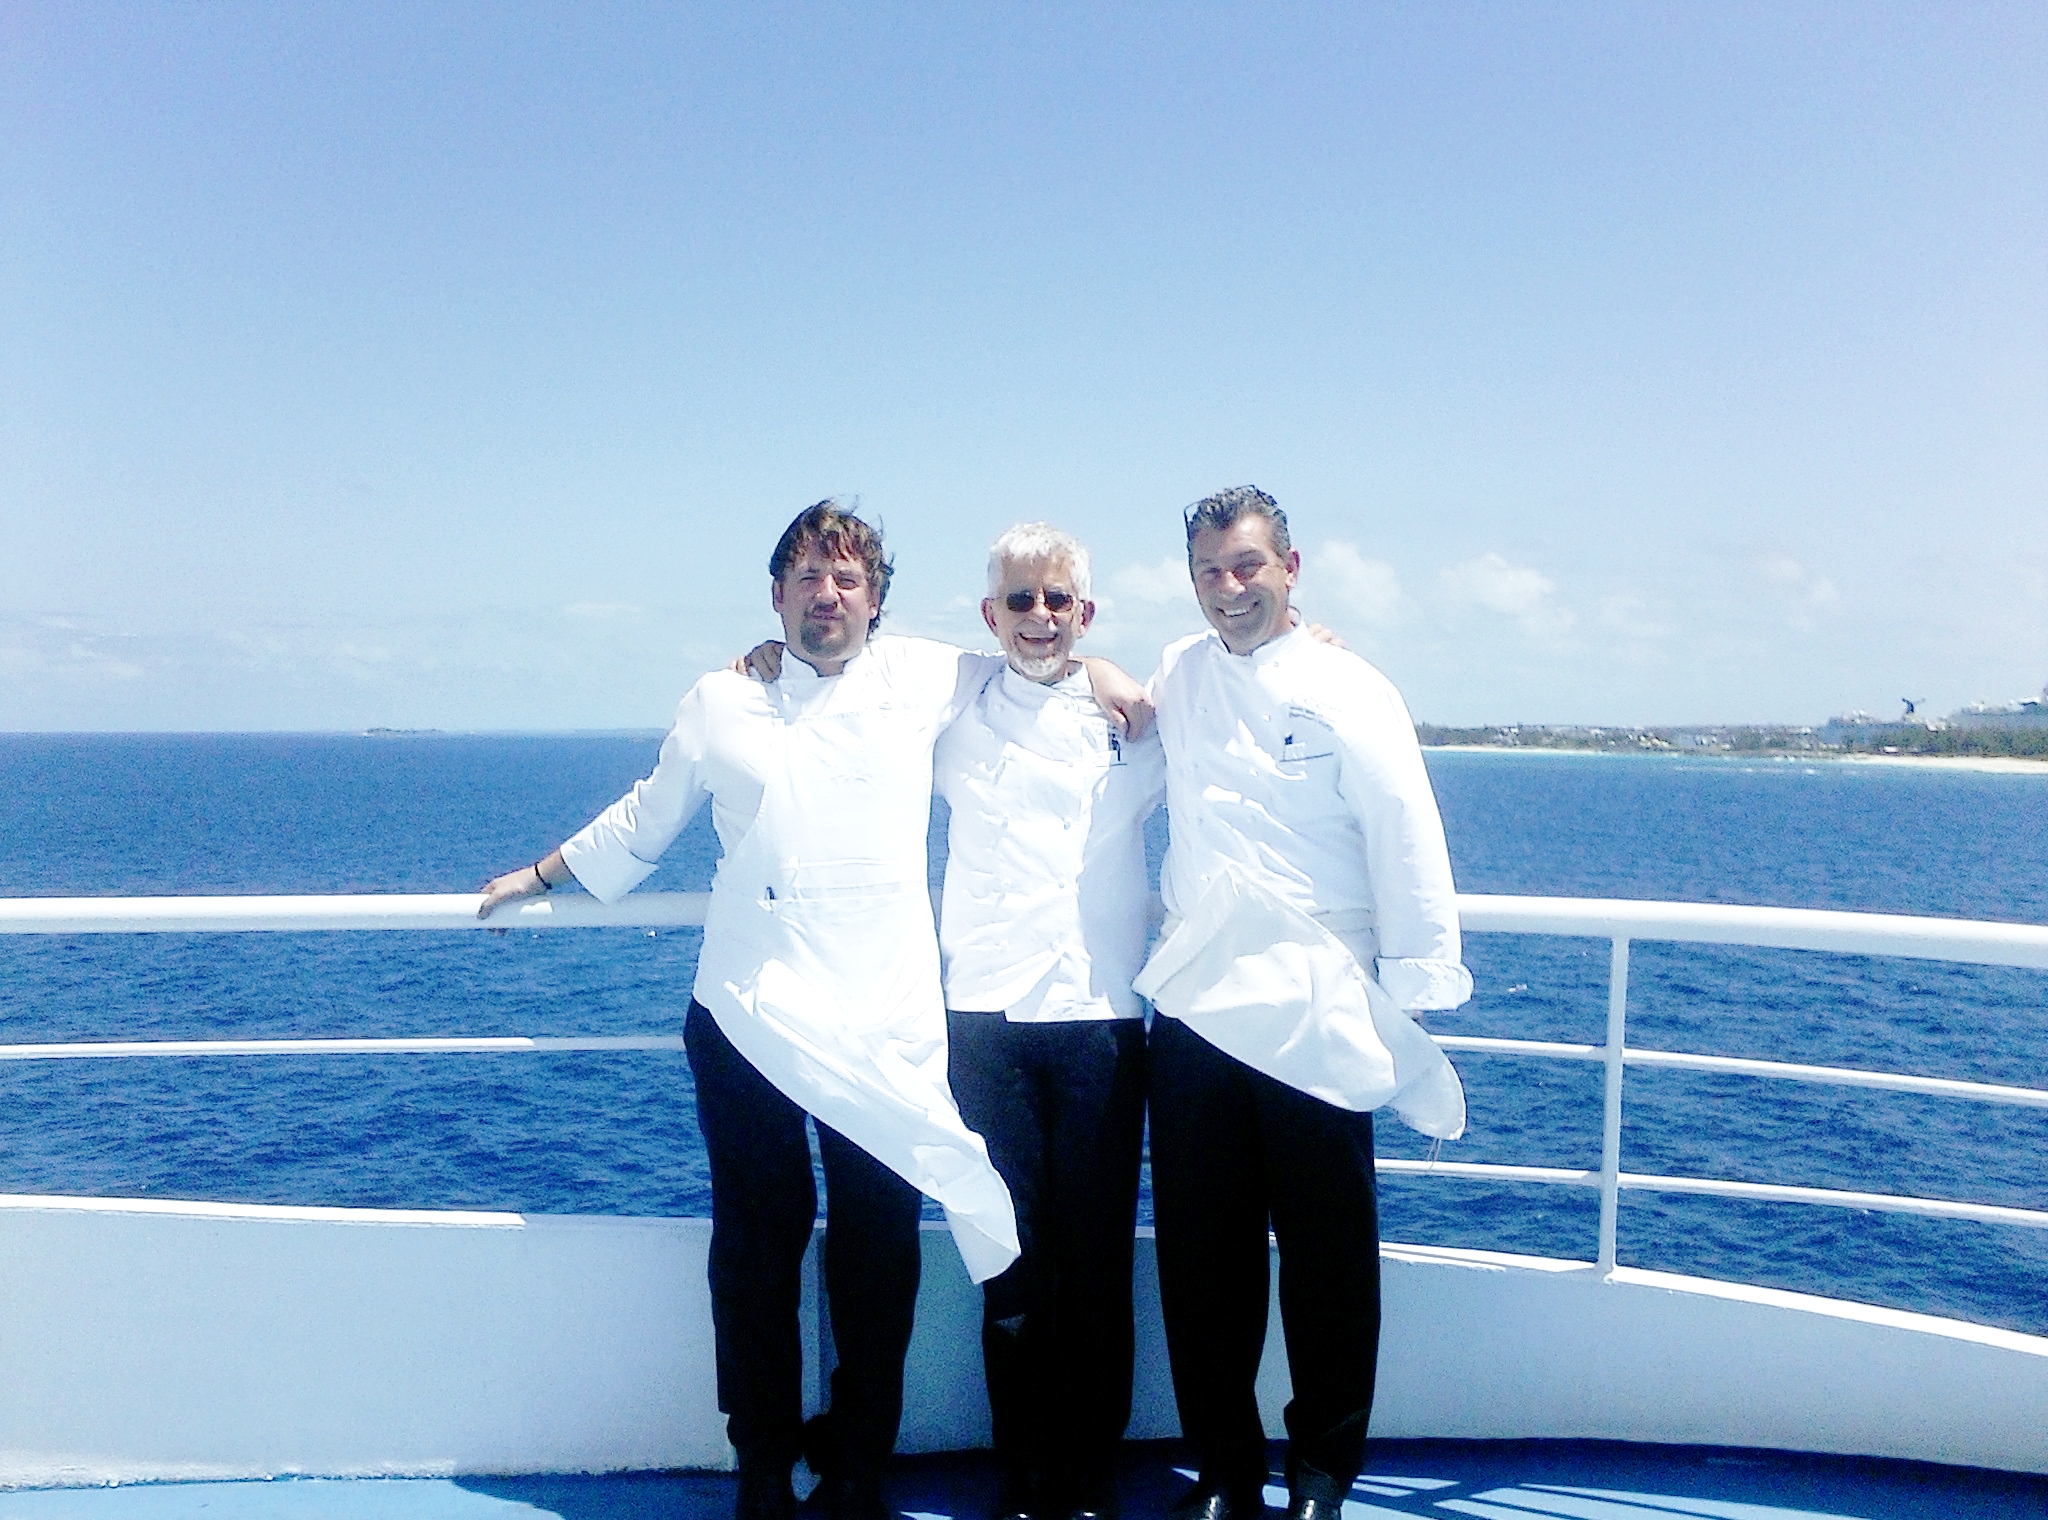 “We returned from a cruise and were totally amazed by all of our meals. We learned they were based on Chef Ron's products and quickly placed our order! We've so glad to have discovered Eco-cuisine!”